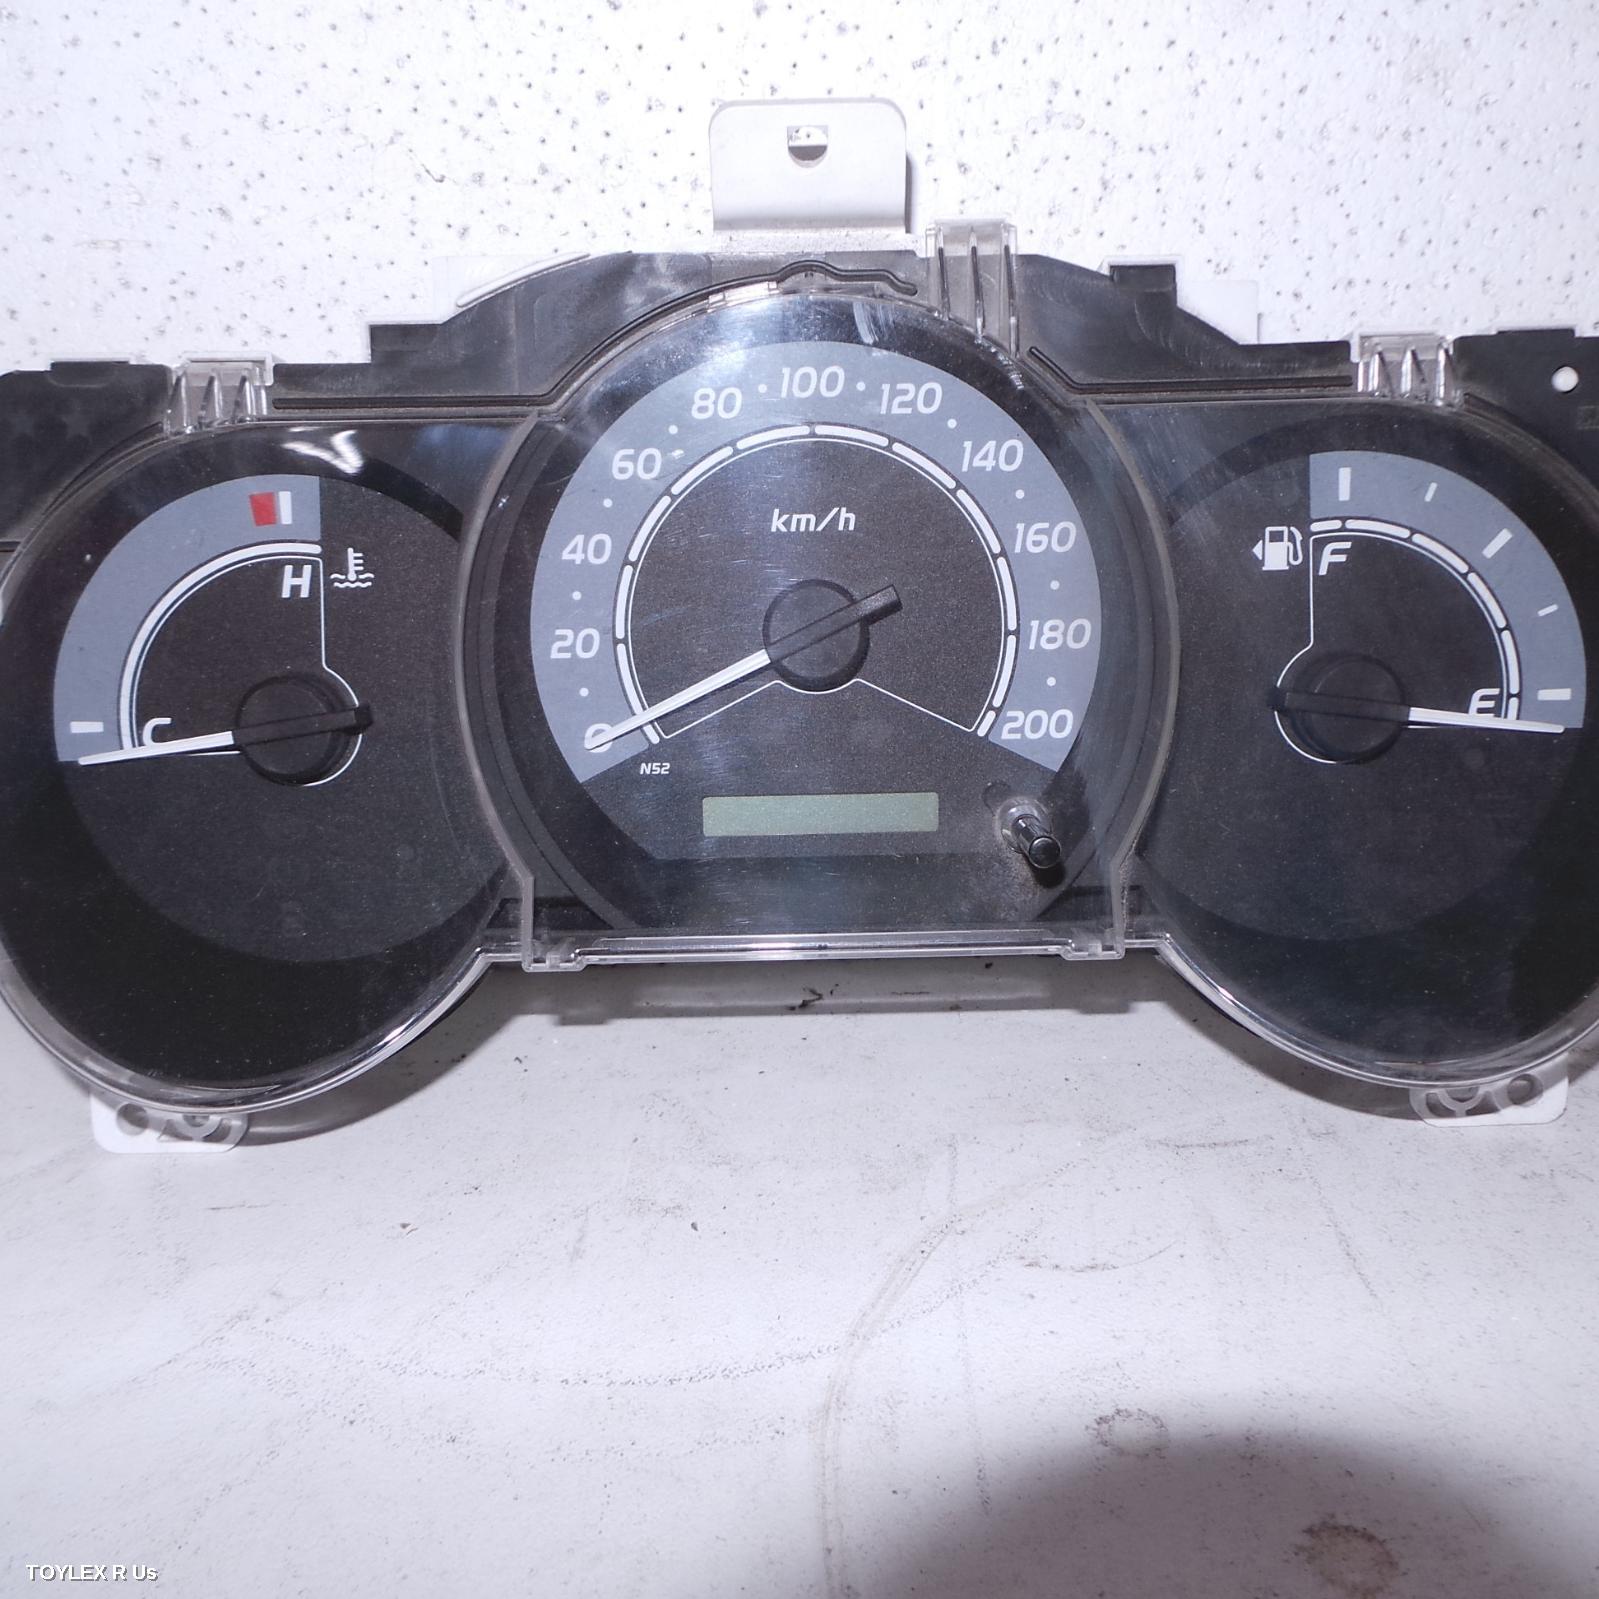 TOYOTA HILUX, Instrument Cluster, PETROL, 2.7, WORKMATE, 02/05-06/11